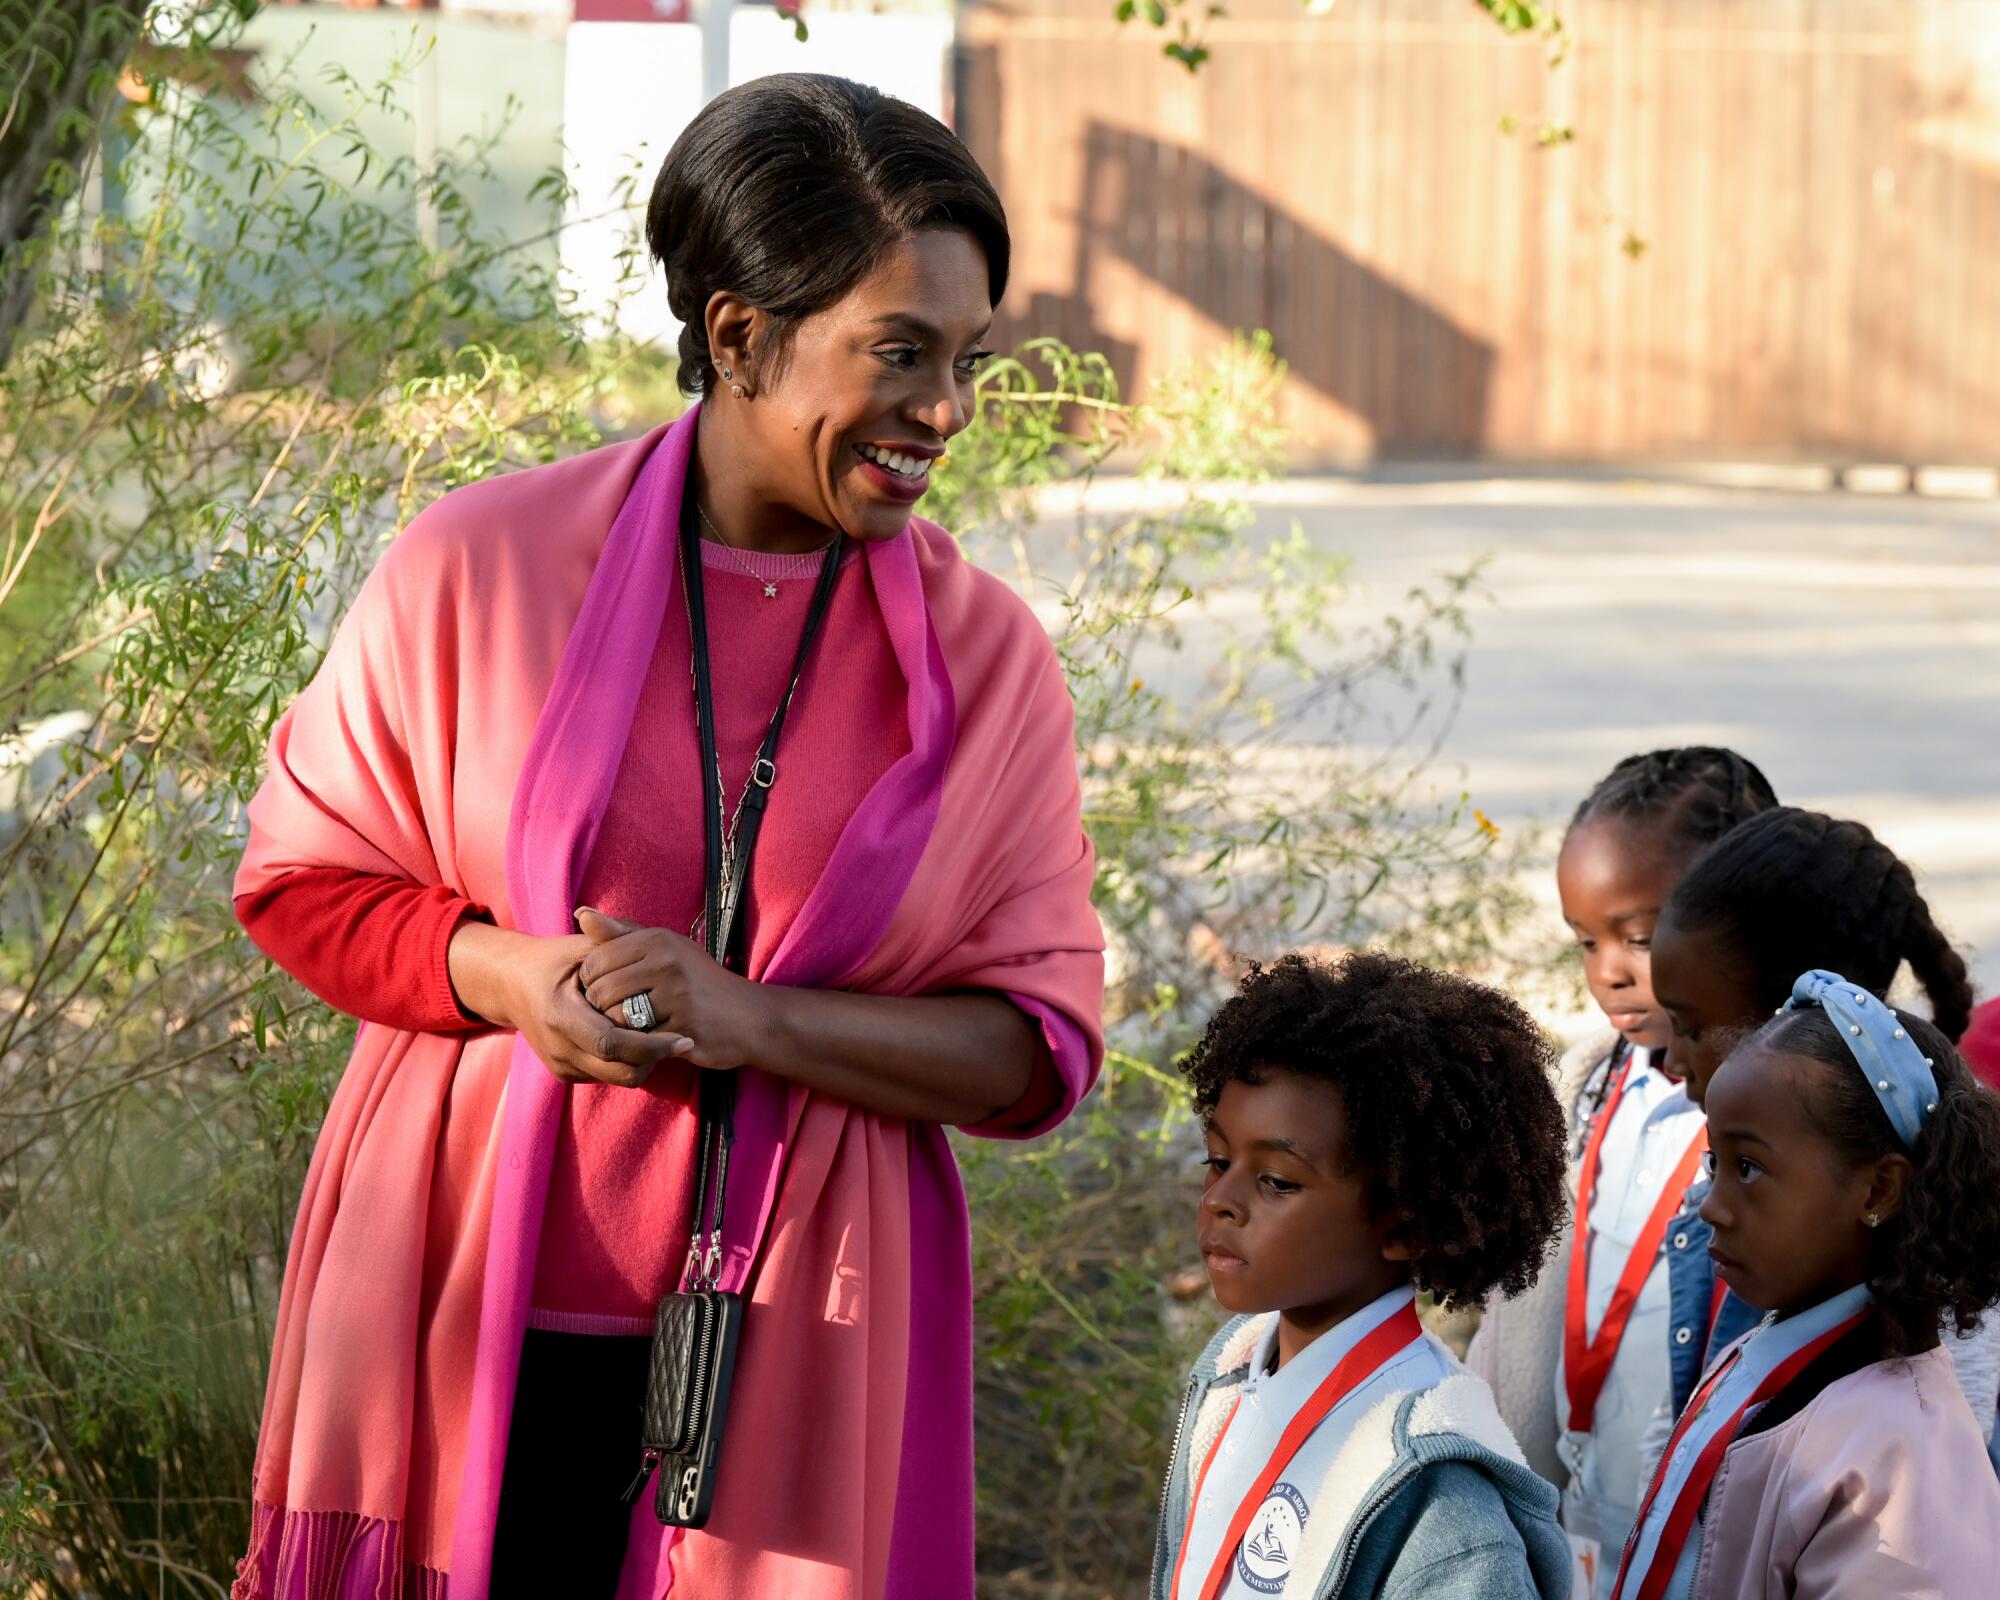 A woman dressed in pink stands leaning toward four young schoolchildren.